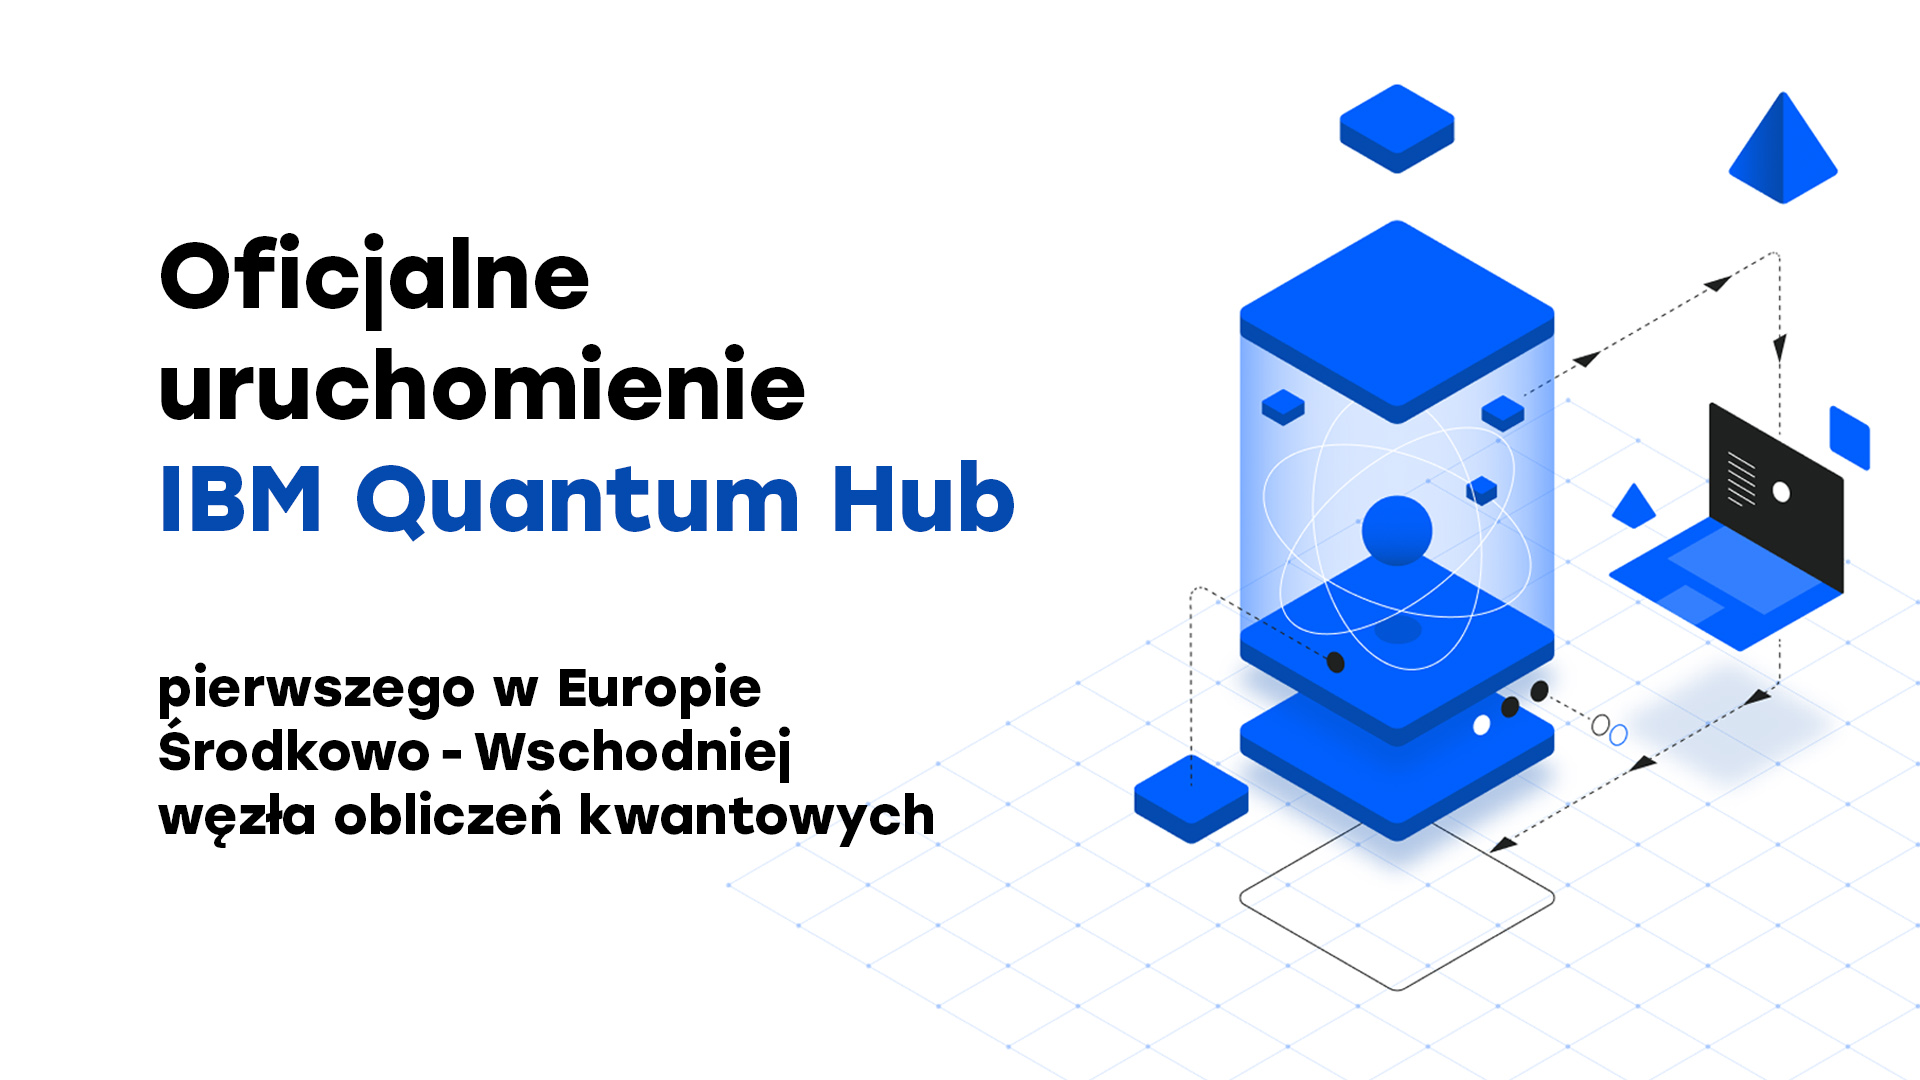 Poznań Has the First Quantum Hub in Central and Eastern Europe